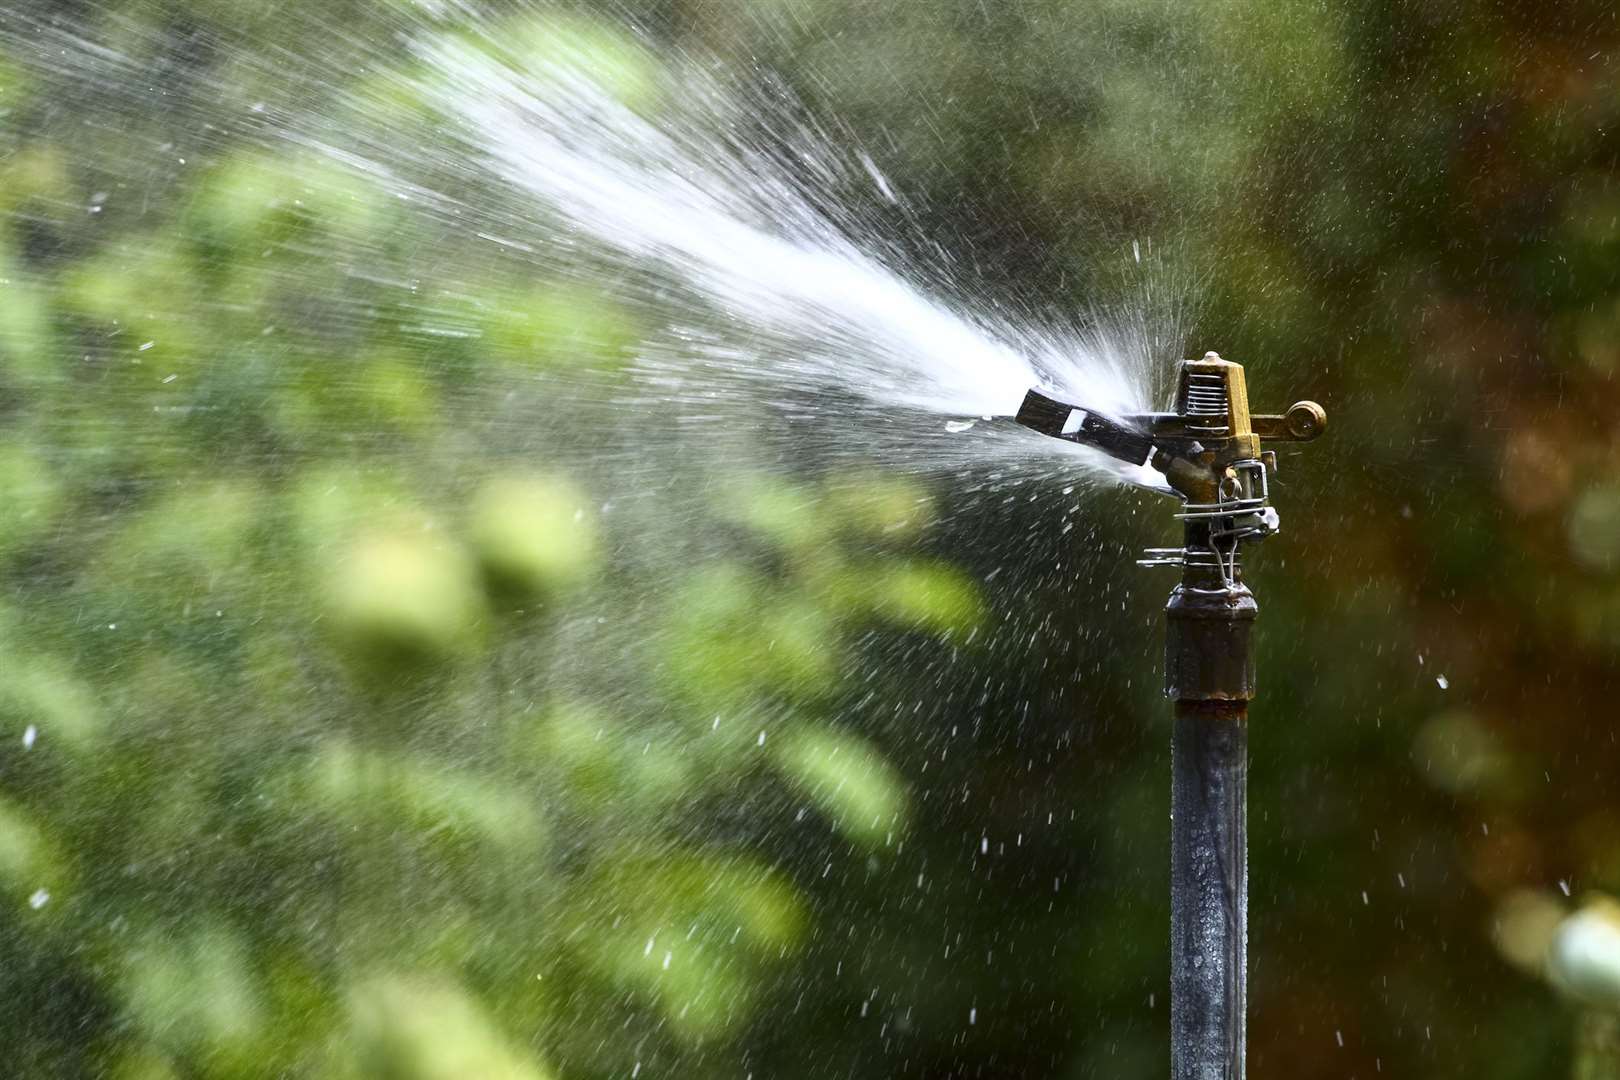 South East Water says it needs to conserve supplies ahead of autumn and winter. Image: Istock.